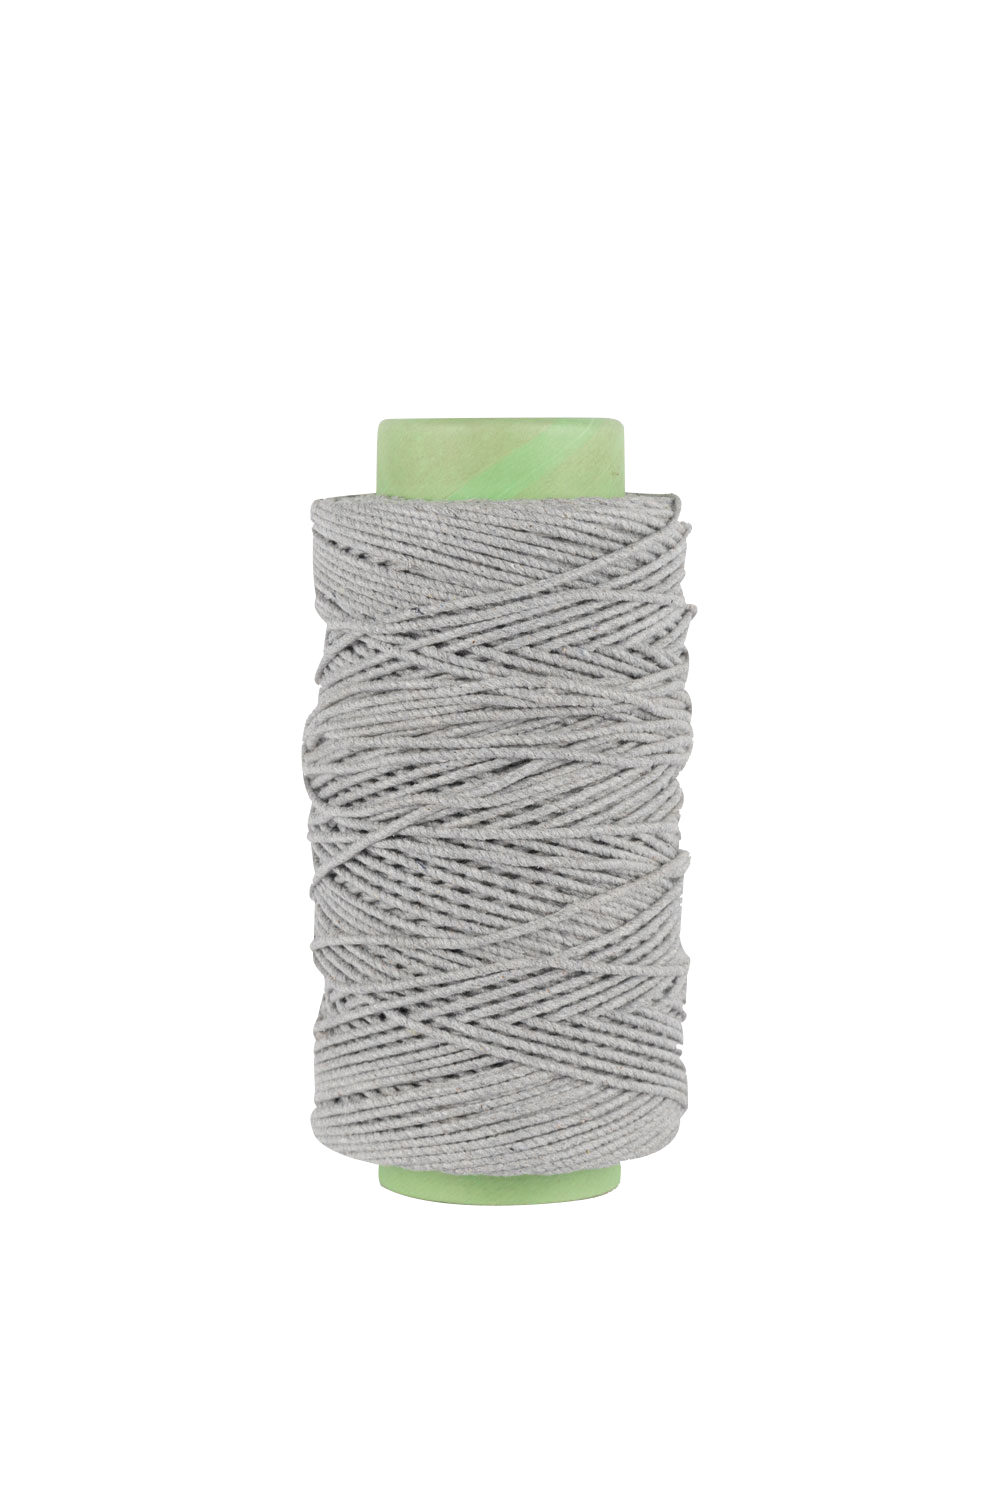 3mm 2 ply 100% cotton rope in light gray